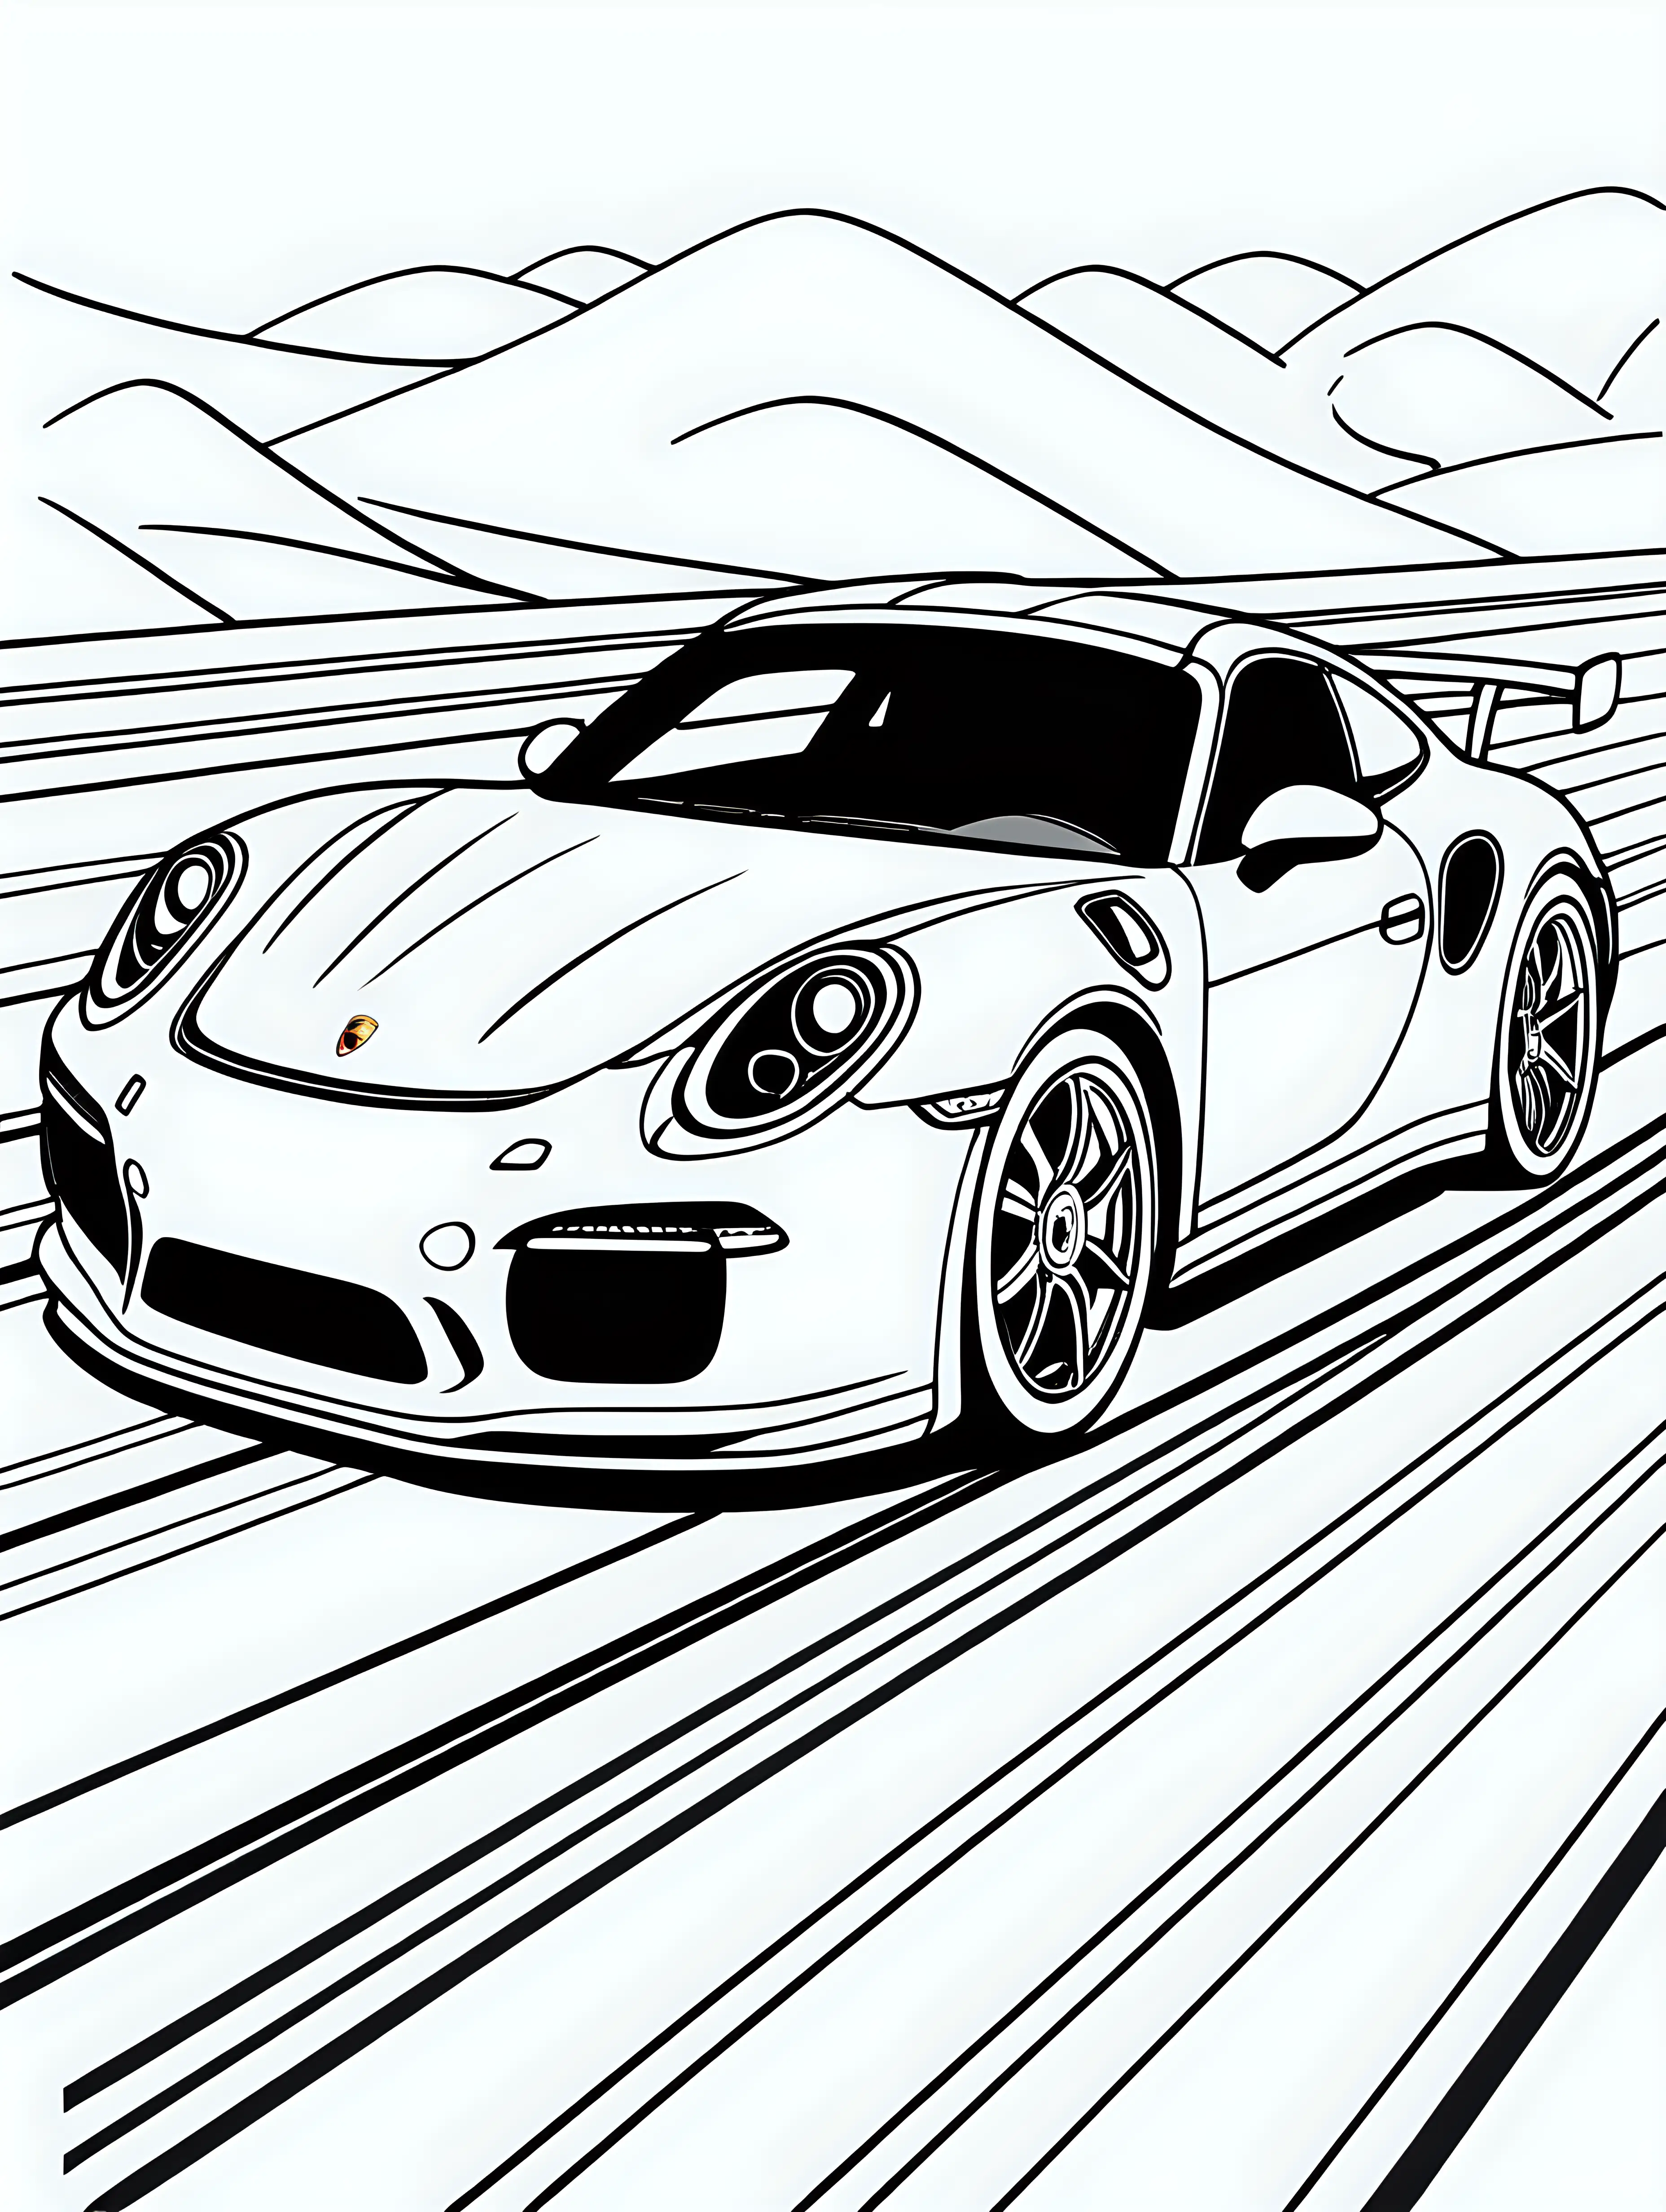 coloring page for kids, porsche car, the car is on a car track,  black lines white background